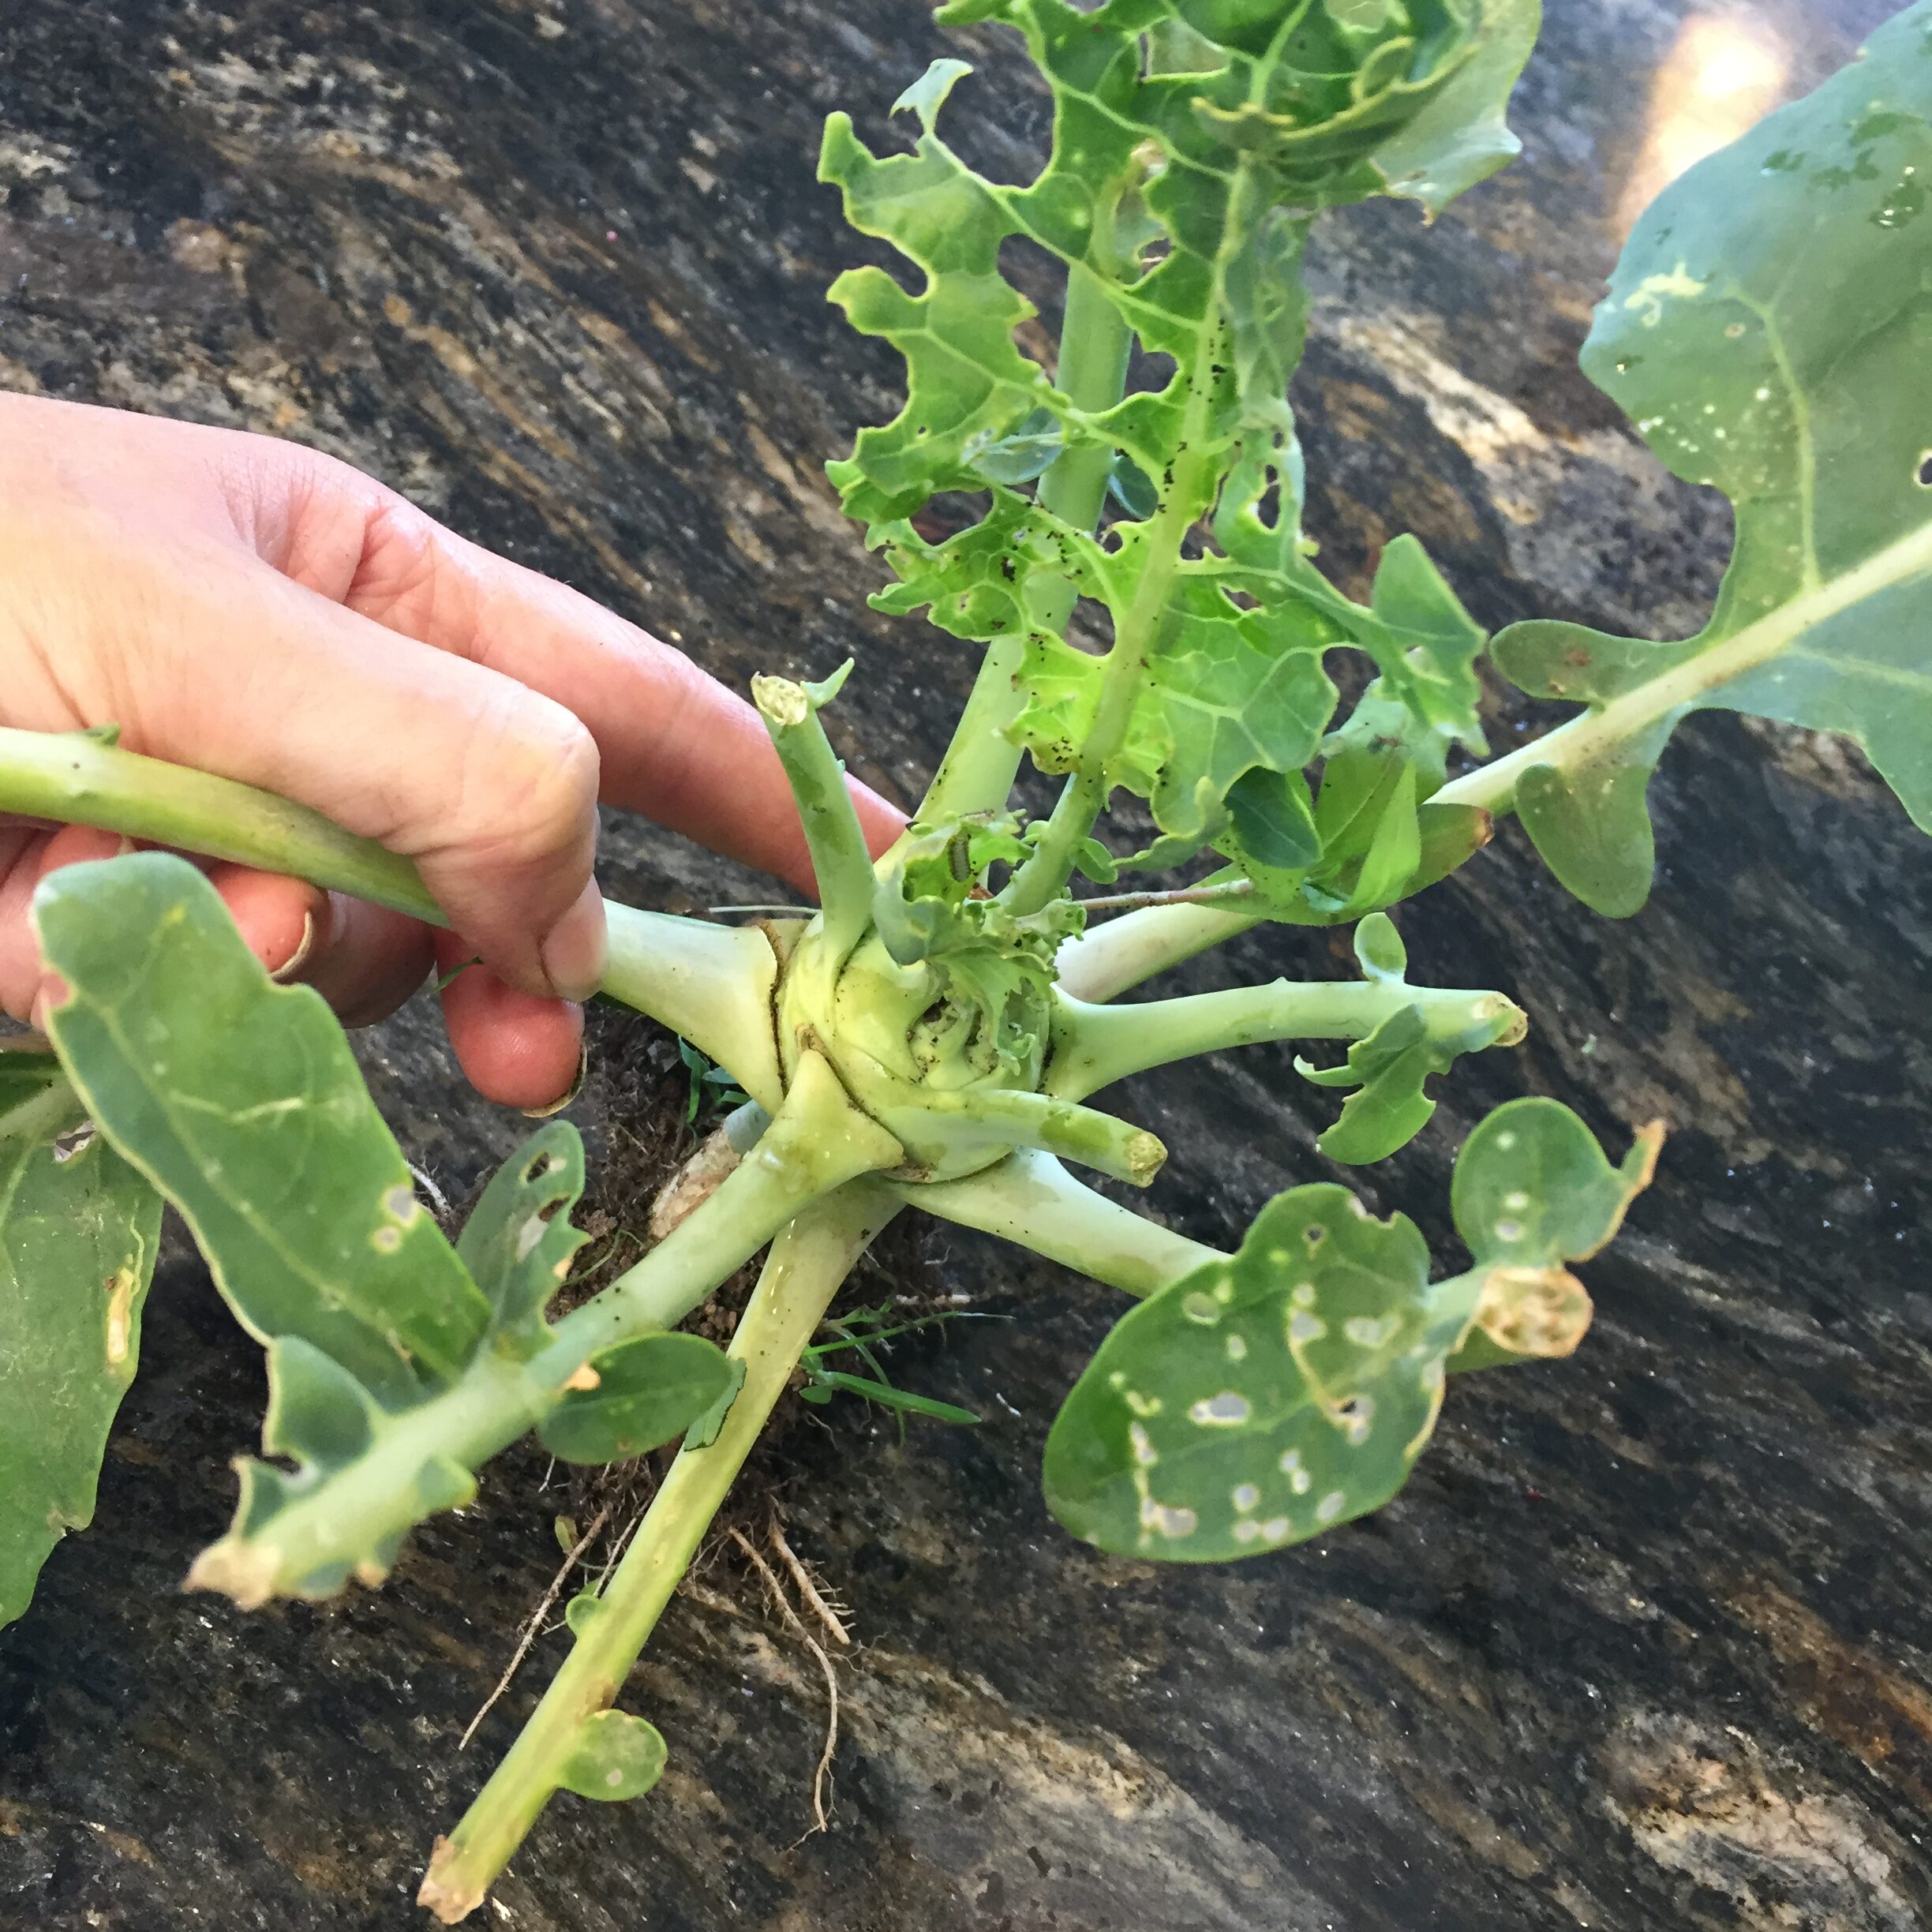 Deer- and Insect-damaged kohlrabi plant